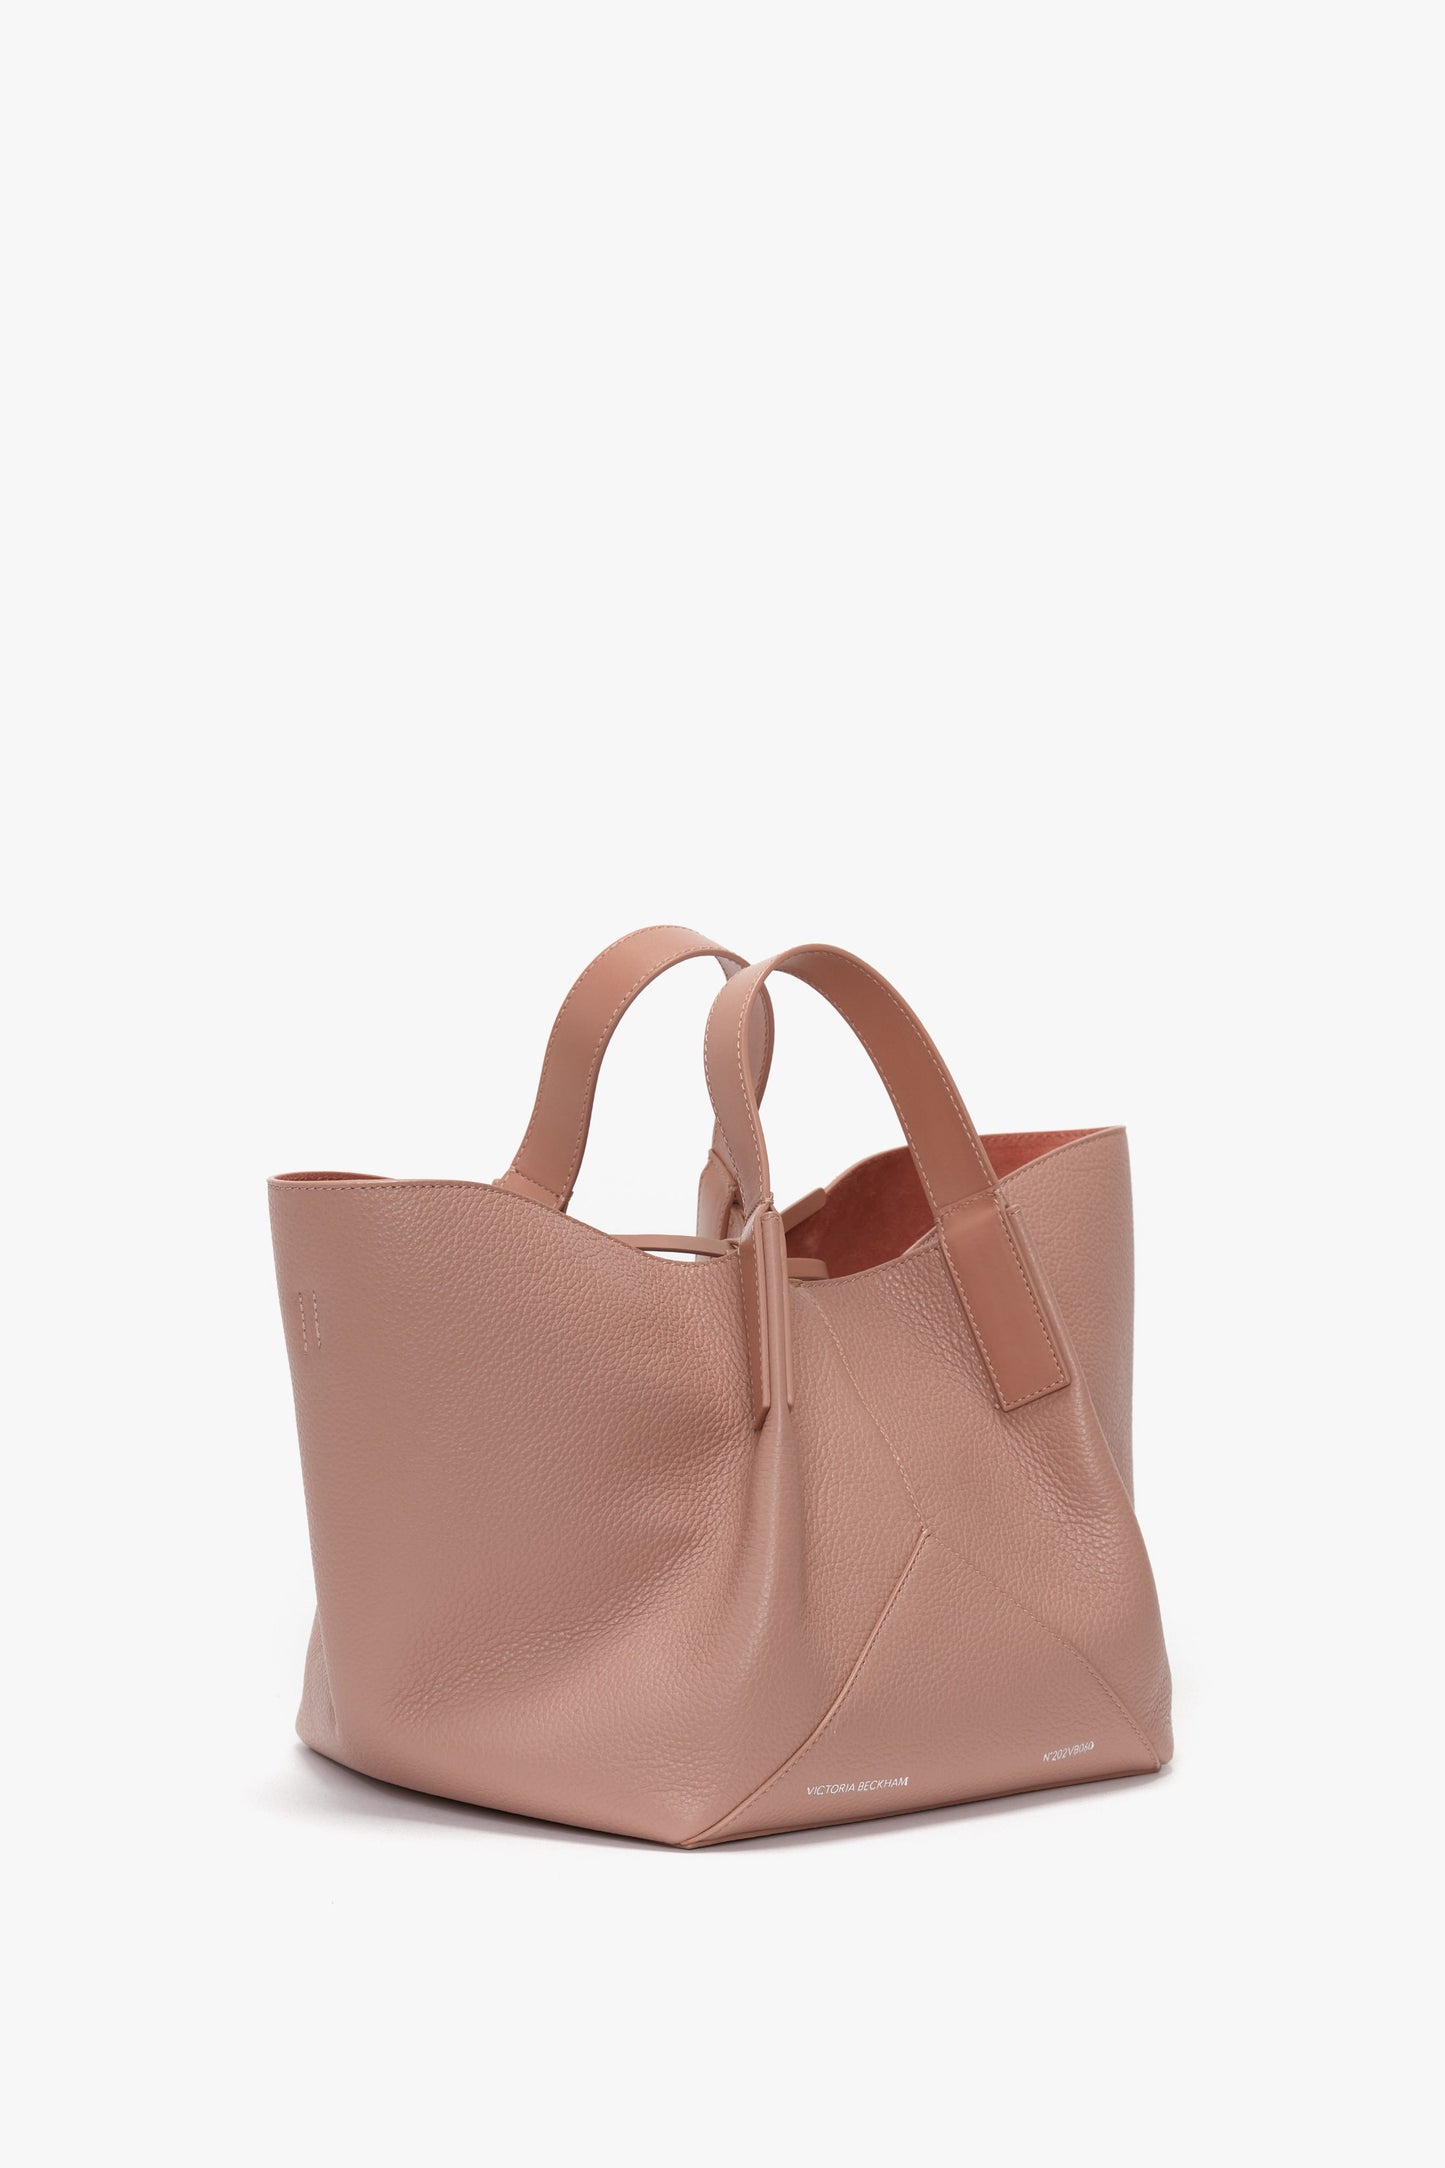 A large, structured pink leather tote bag with dual handles and an open top; introducing the Victoria Beckham W11 Mini Tote Bag In Marshmallow Leather.